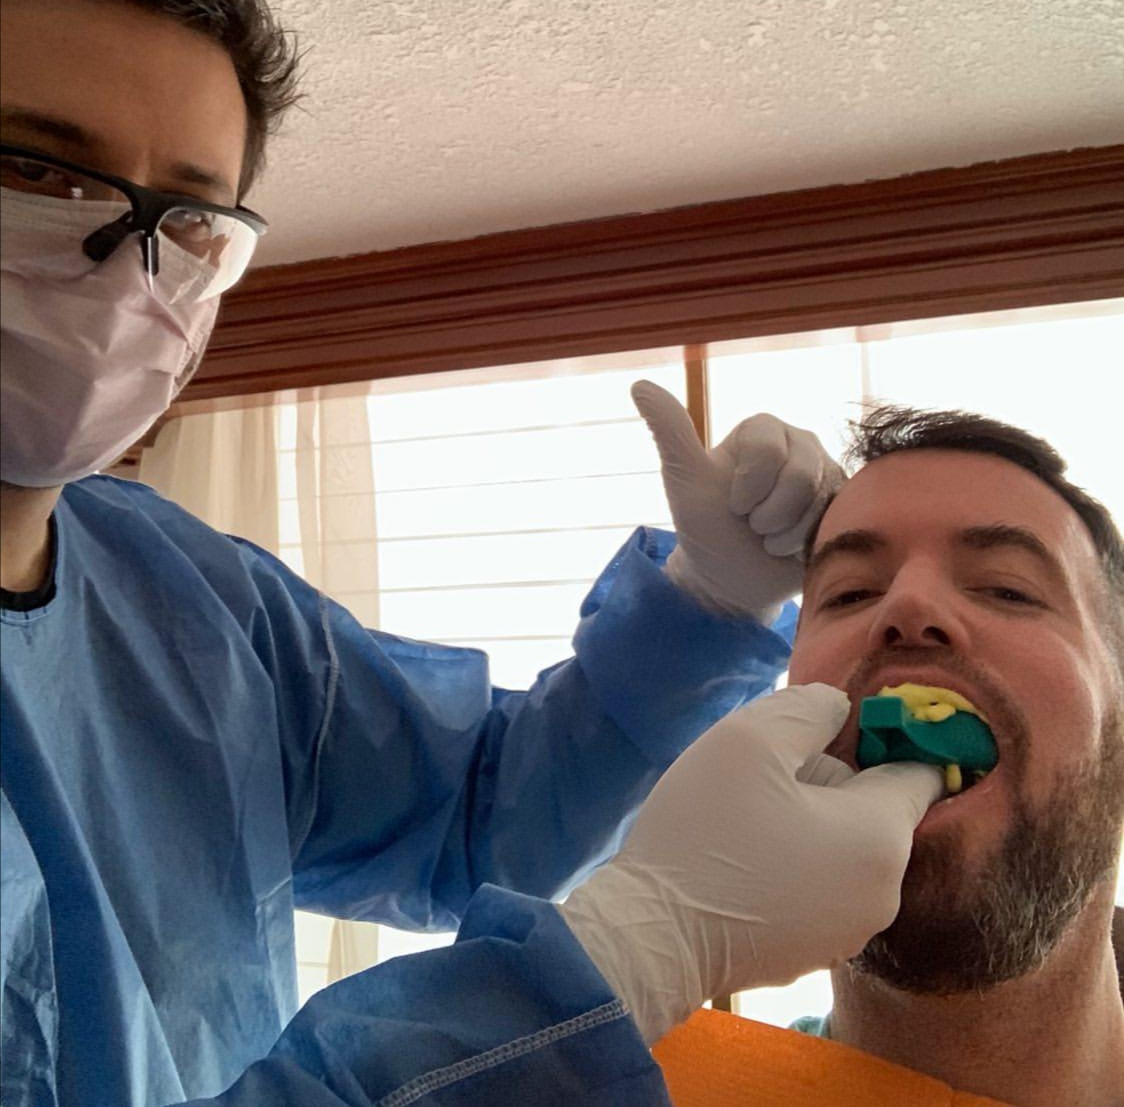 TRIBE STORIES – LEE JORDAN’S DENTAL VISIT THAT CHANGED THE COURSE OF HIS LIFE FOREVER